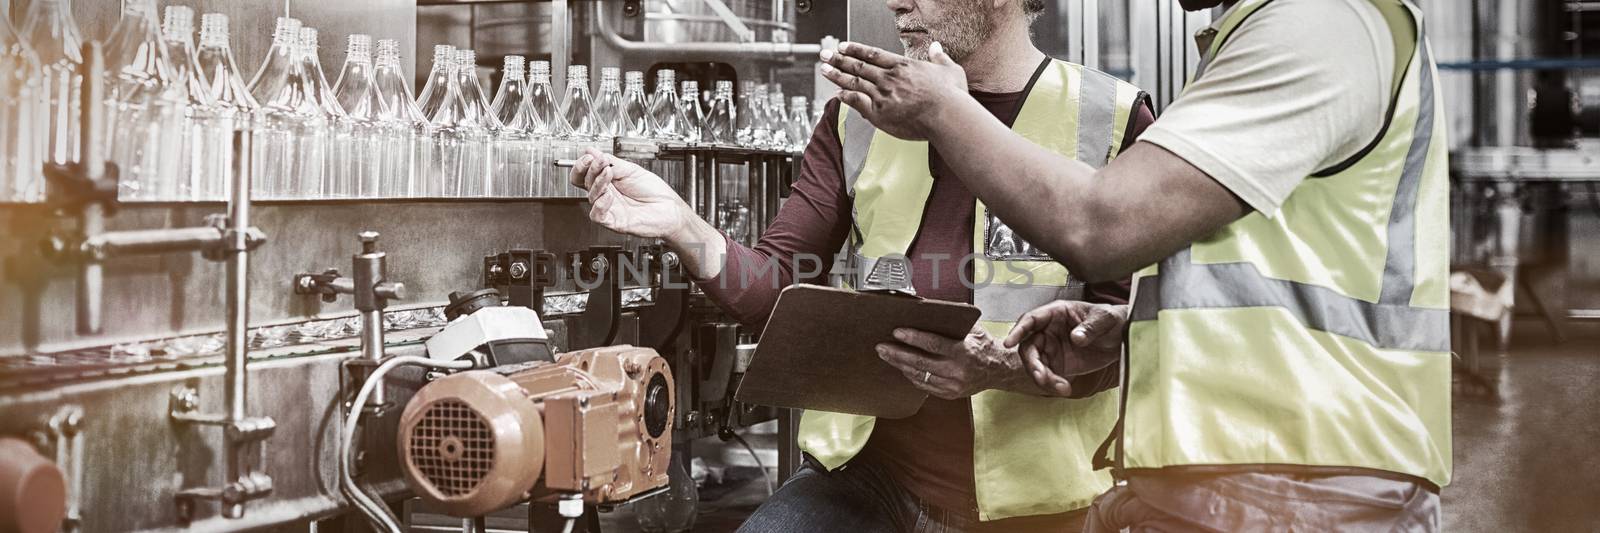 Two factory workers discussing while monitoring drinks production line by Wavebreakmedia